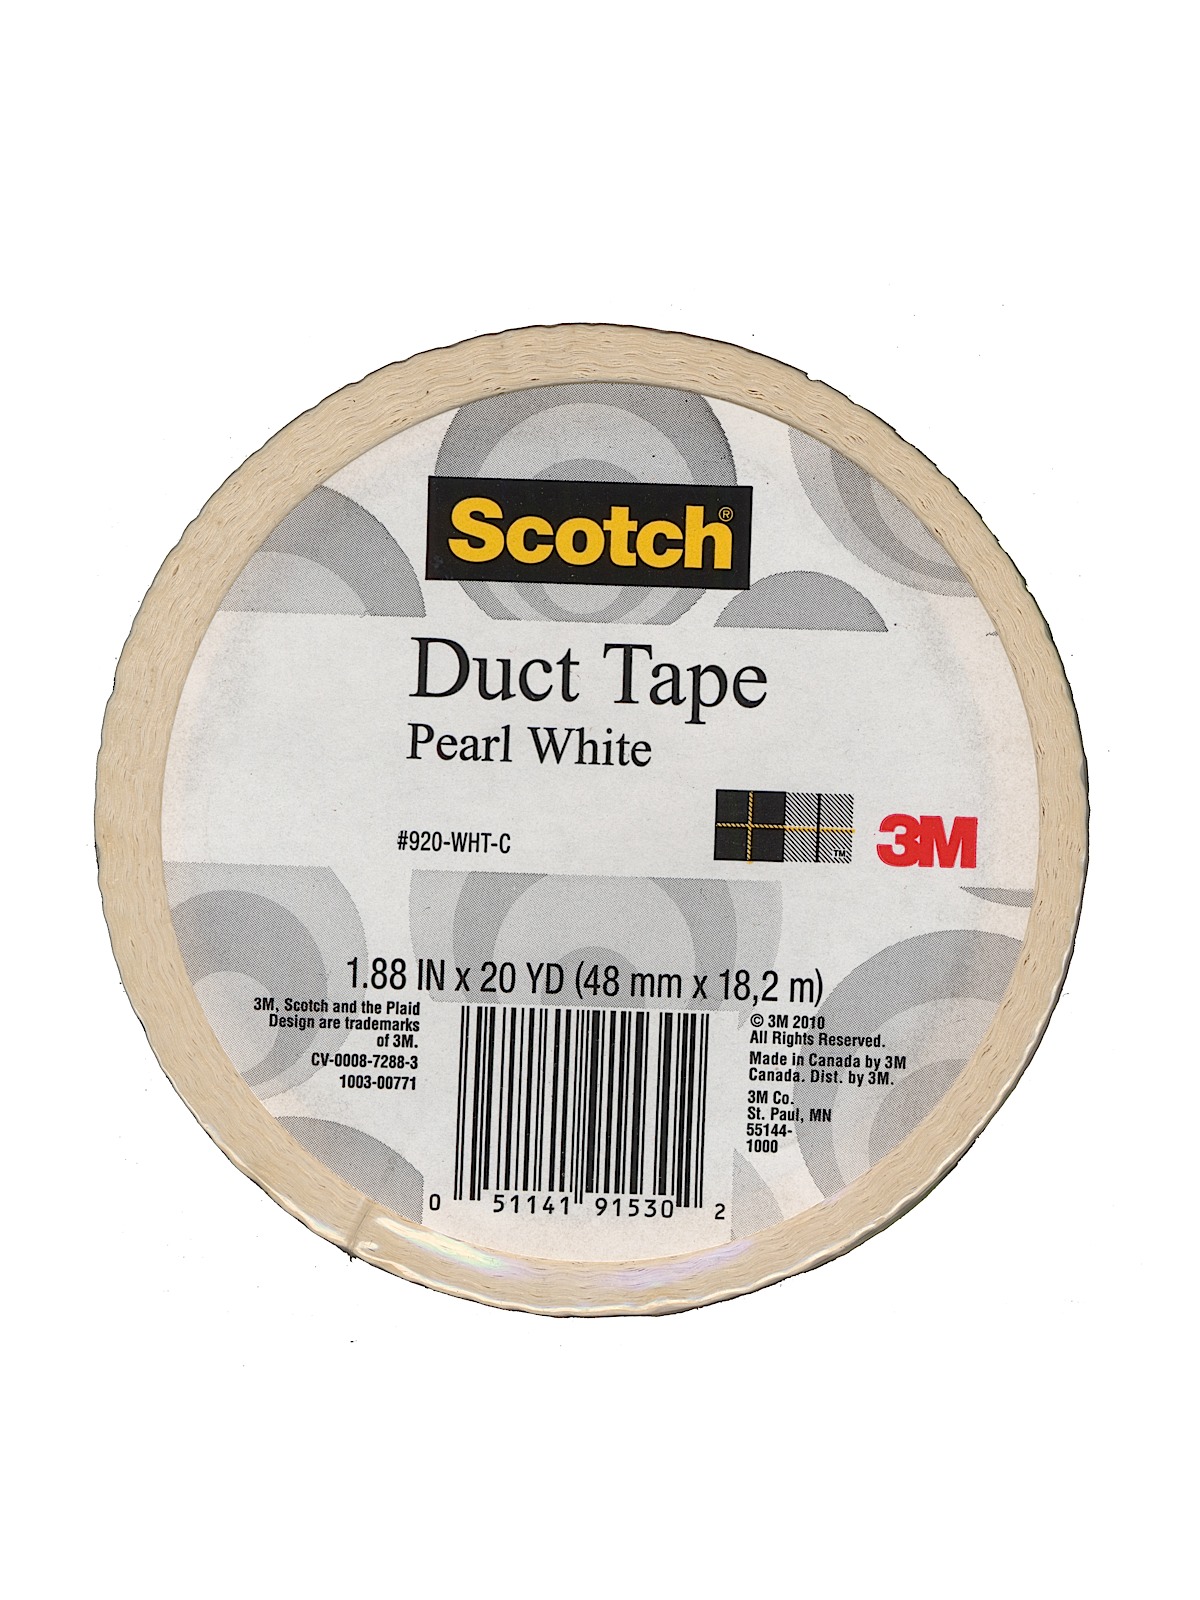 Colored Duct Tape Pearl White 1.88 In. X 20 Yd. Roll 920-WHT-C